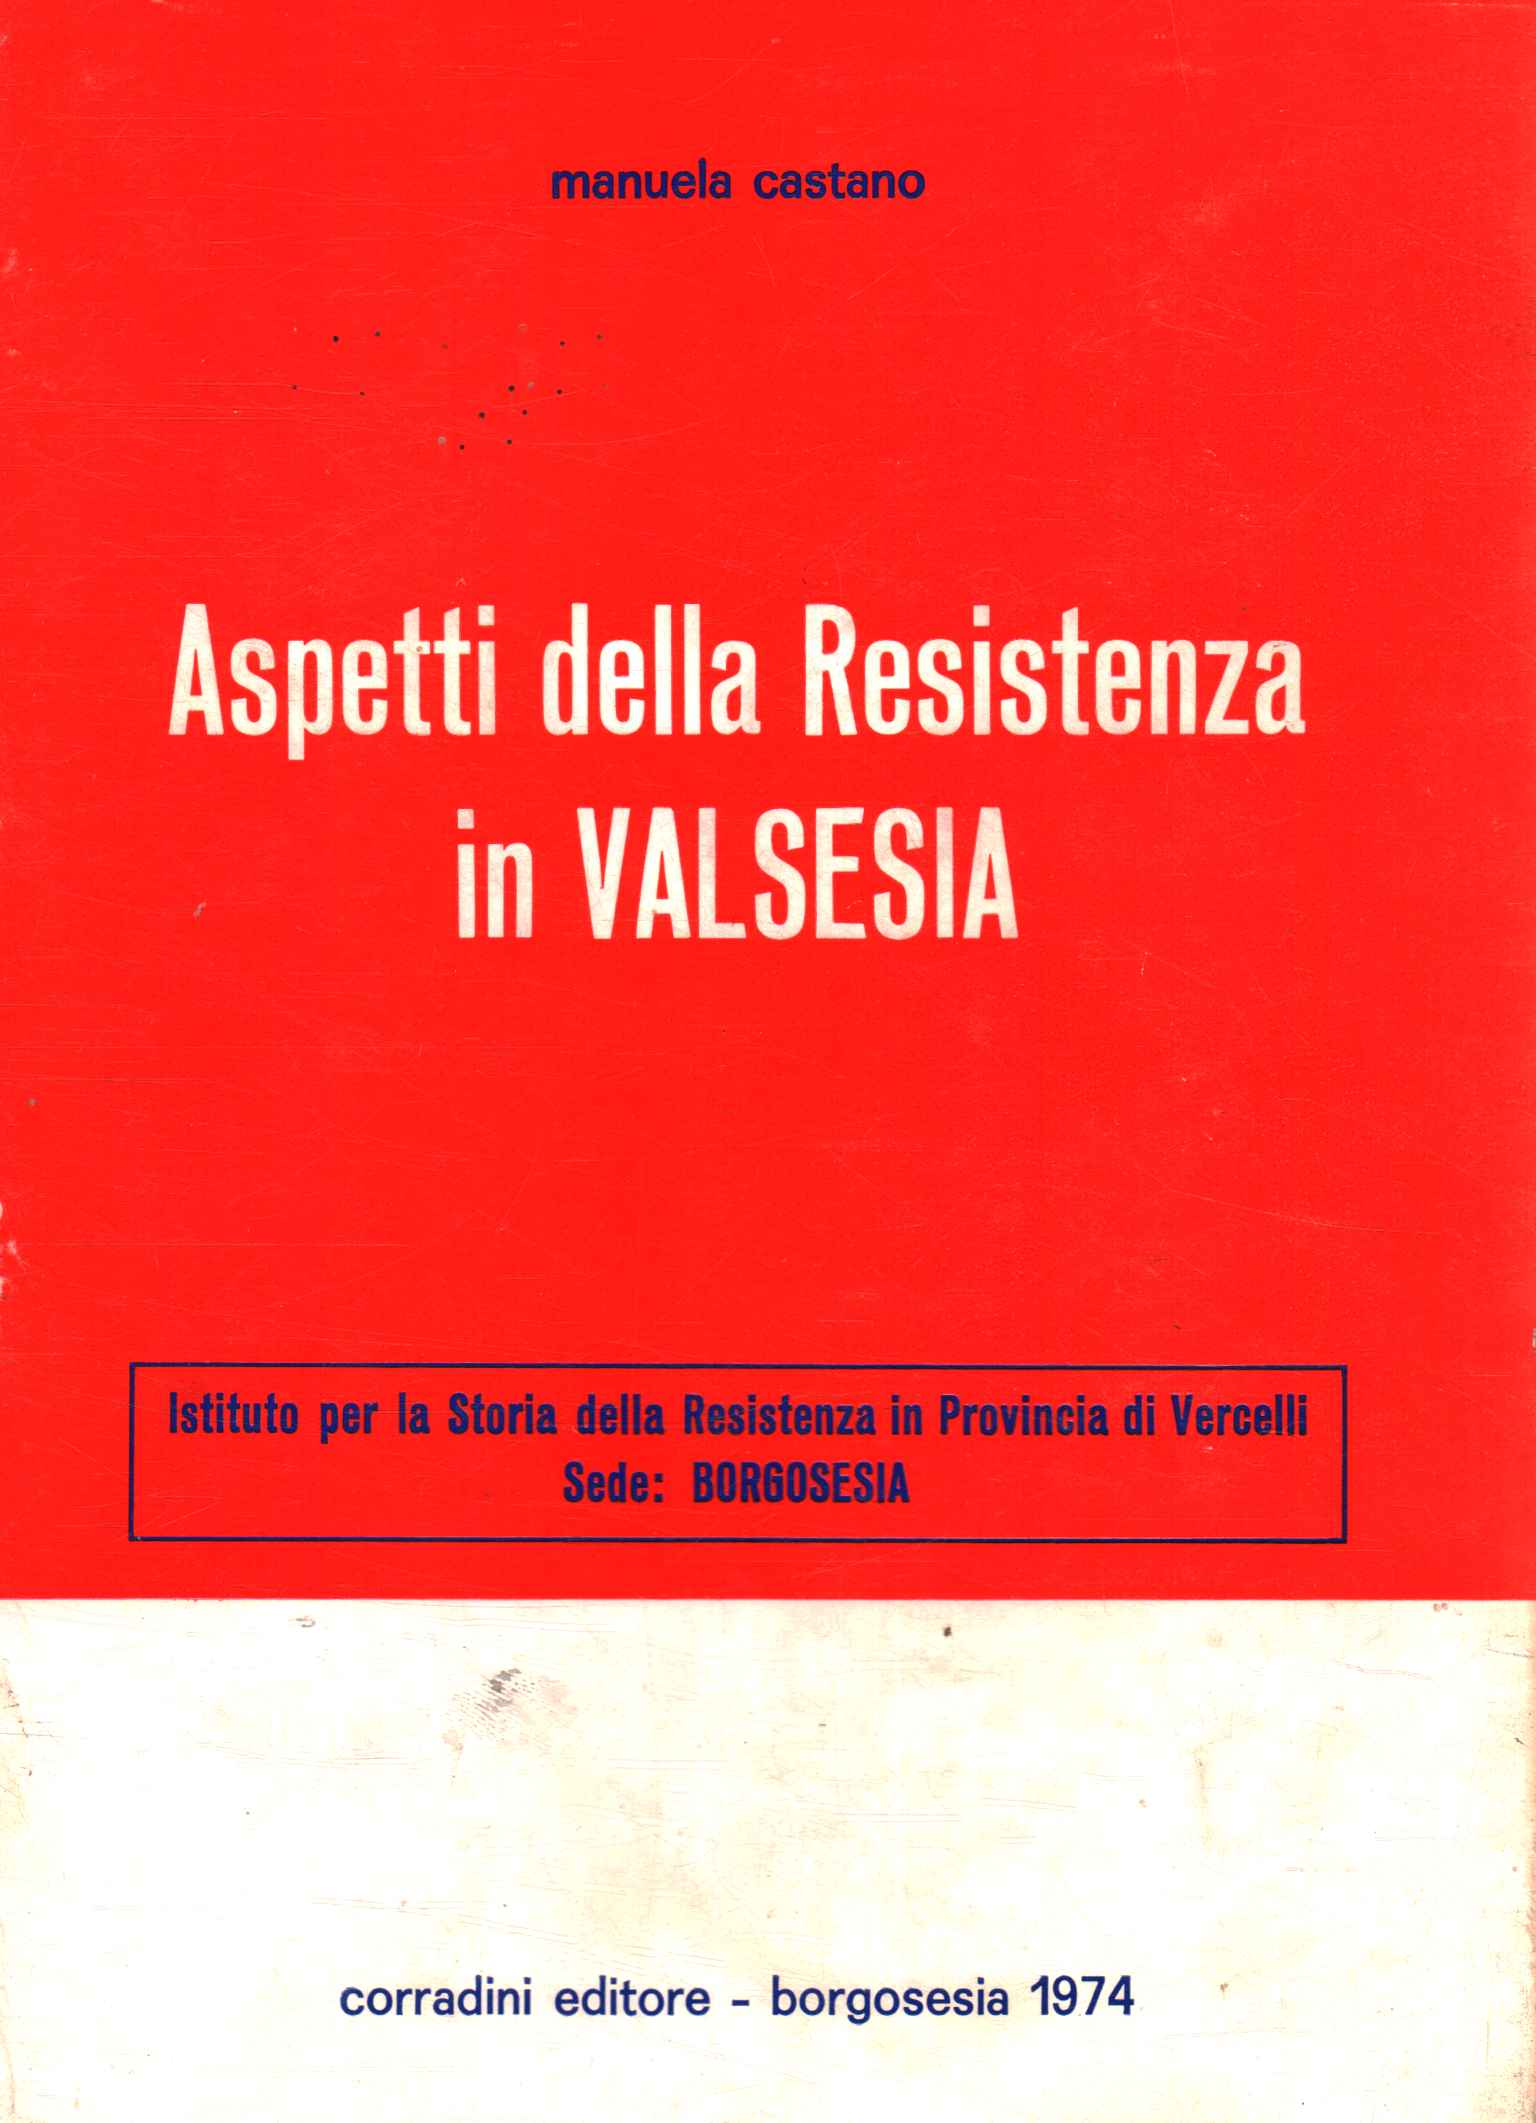 Aspects of resistance in Valsesia